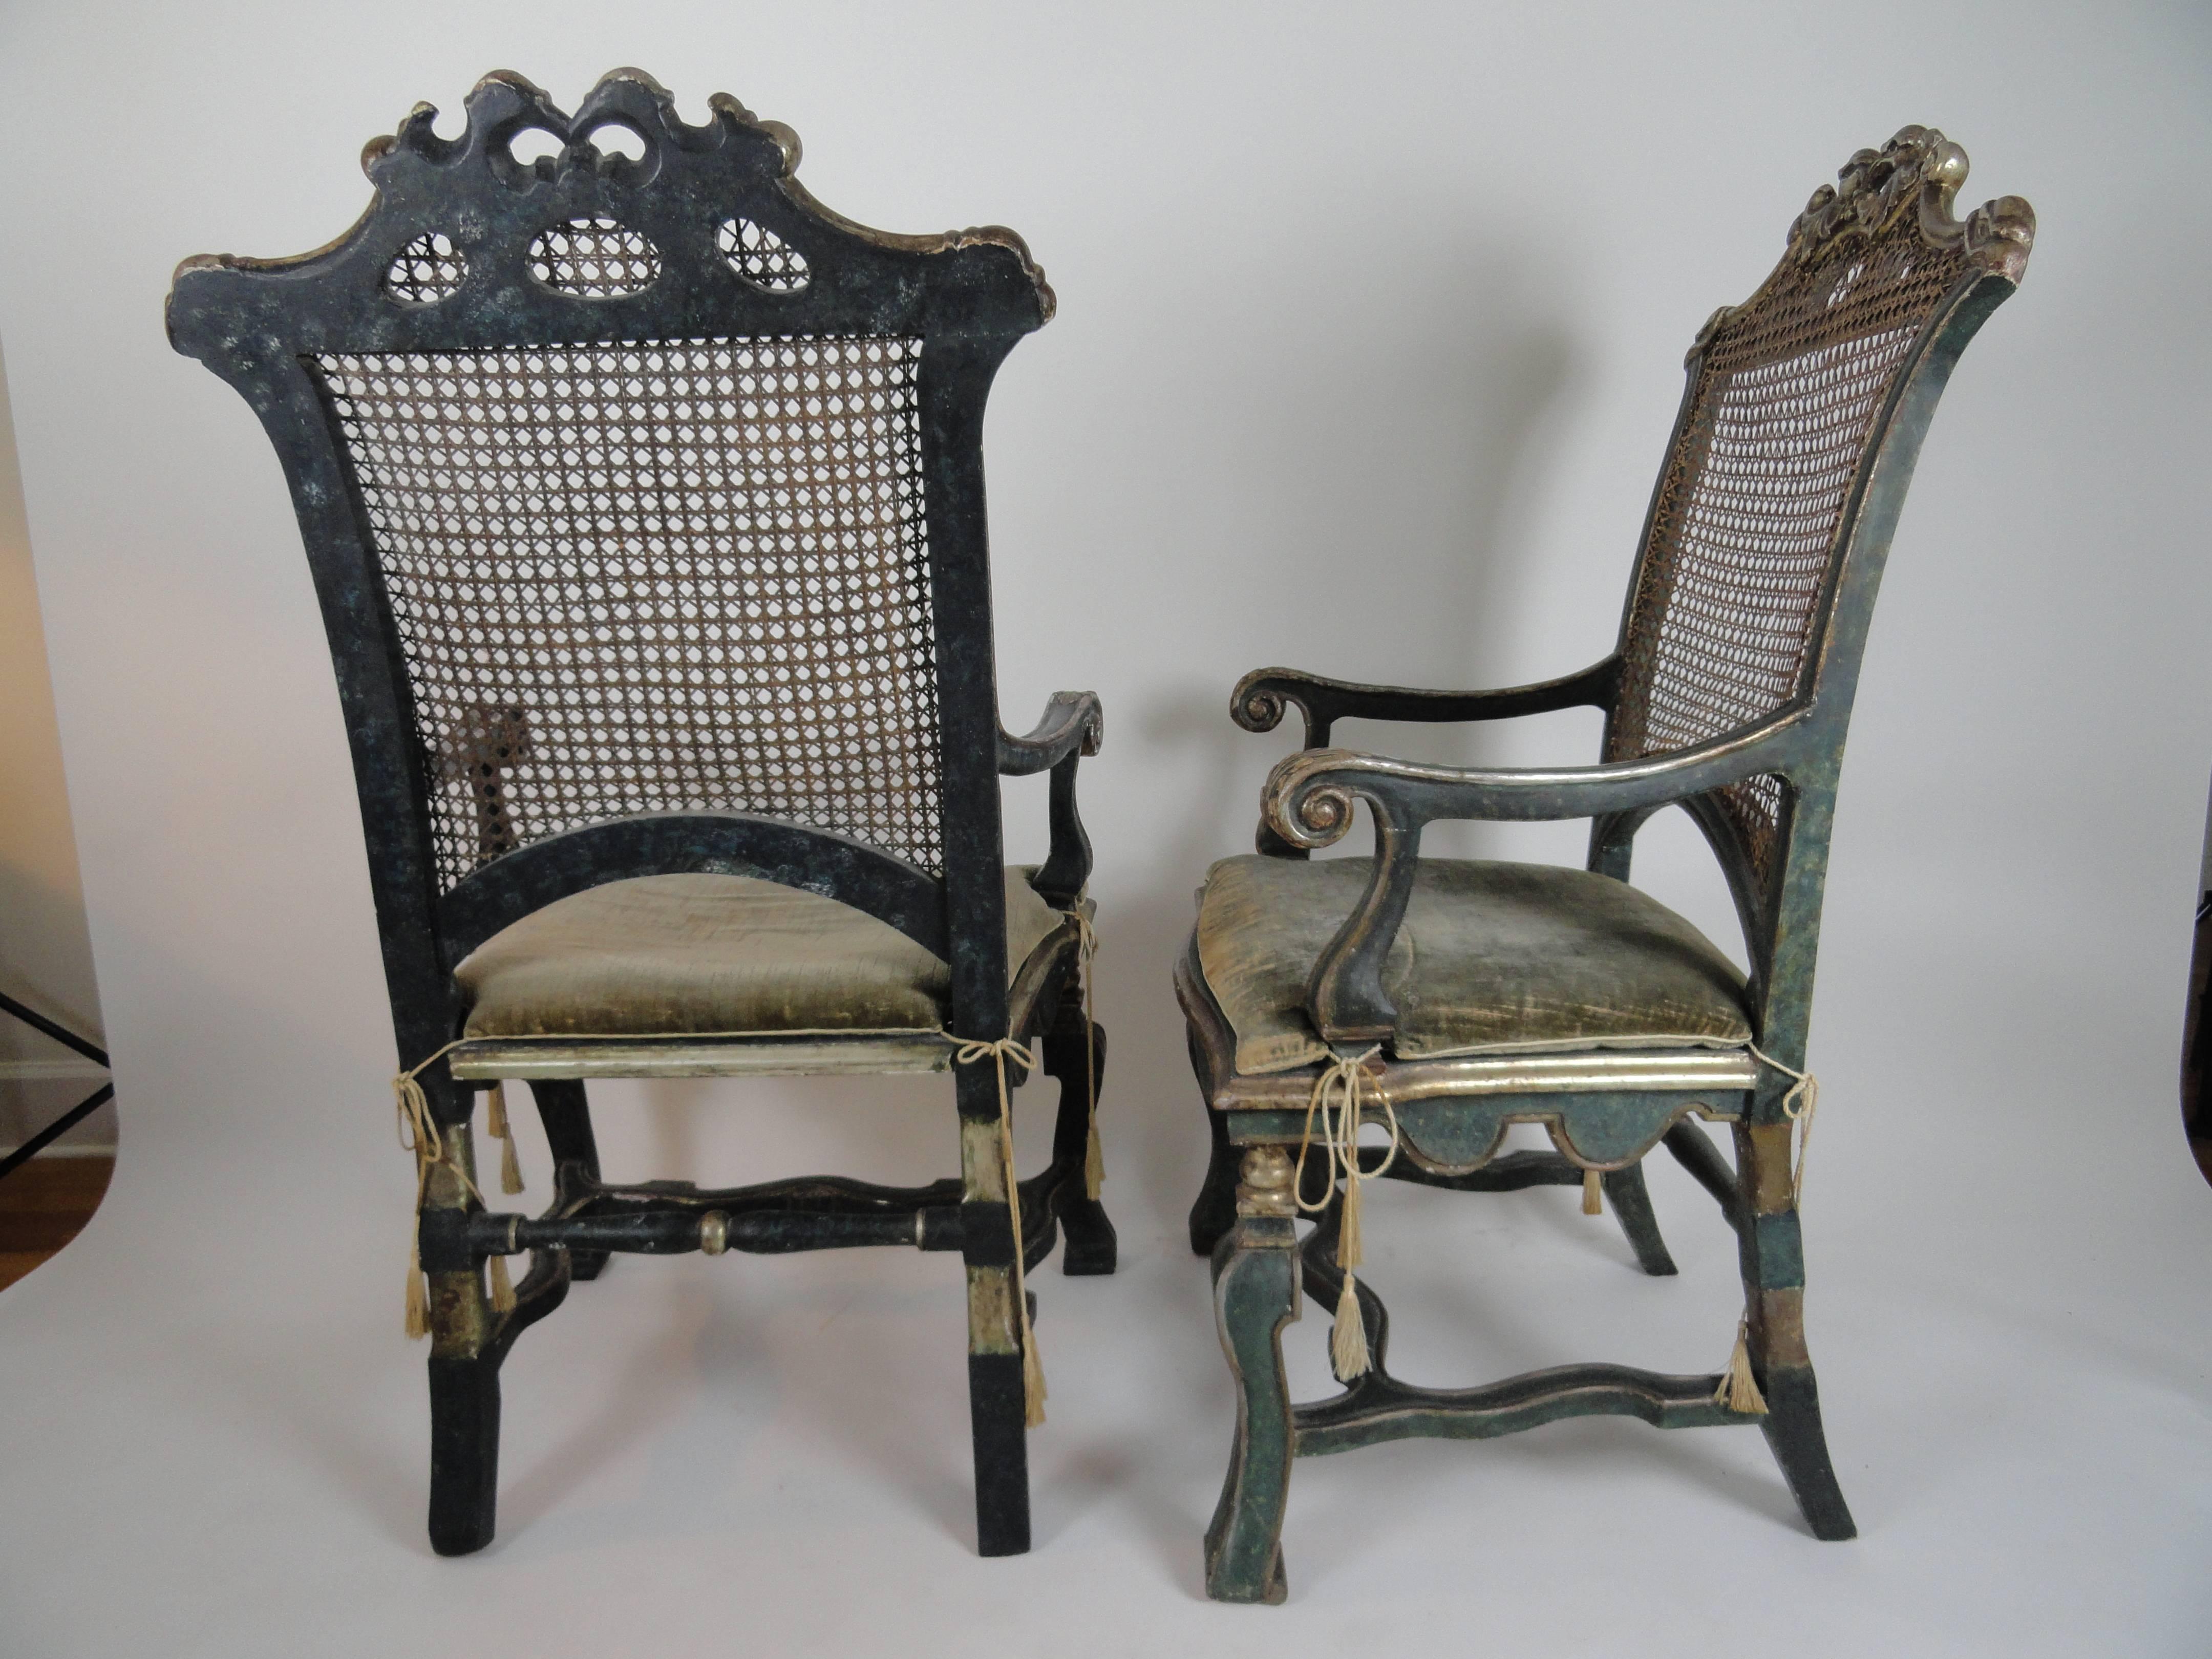 Pair of 18th century Italian Louis XIV Caned Fauteuils.  The rectangular caned back with molded frame and shaped projecting crest rail with centered carved cresting of facing heraldic eagles, joined to framed caned seat with pelmet shaped apron by